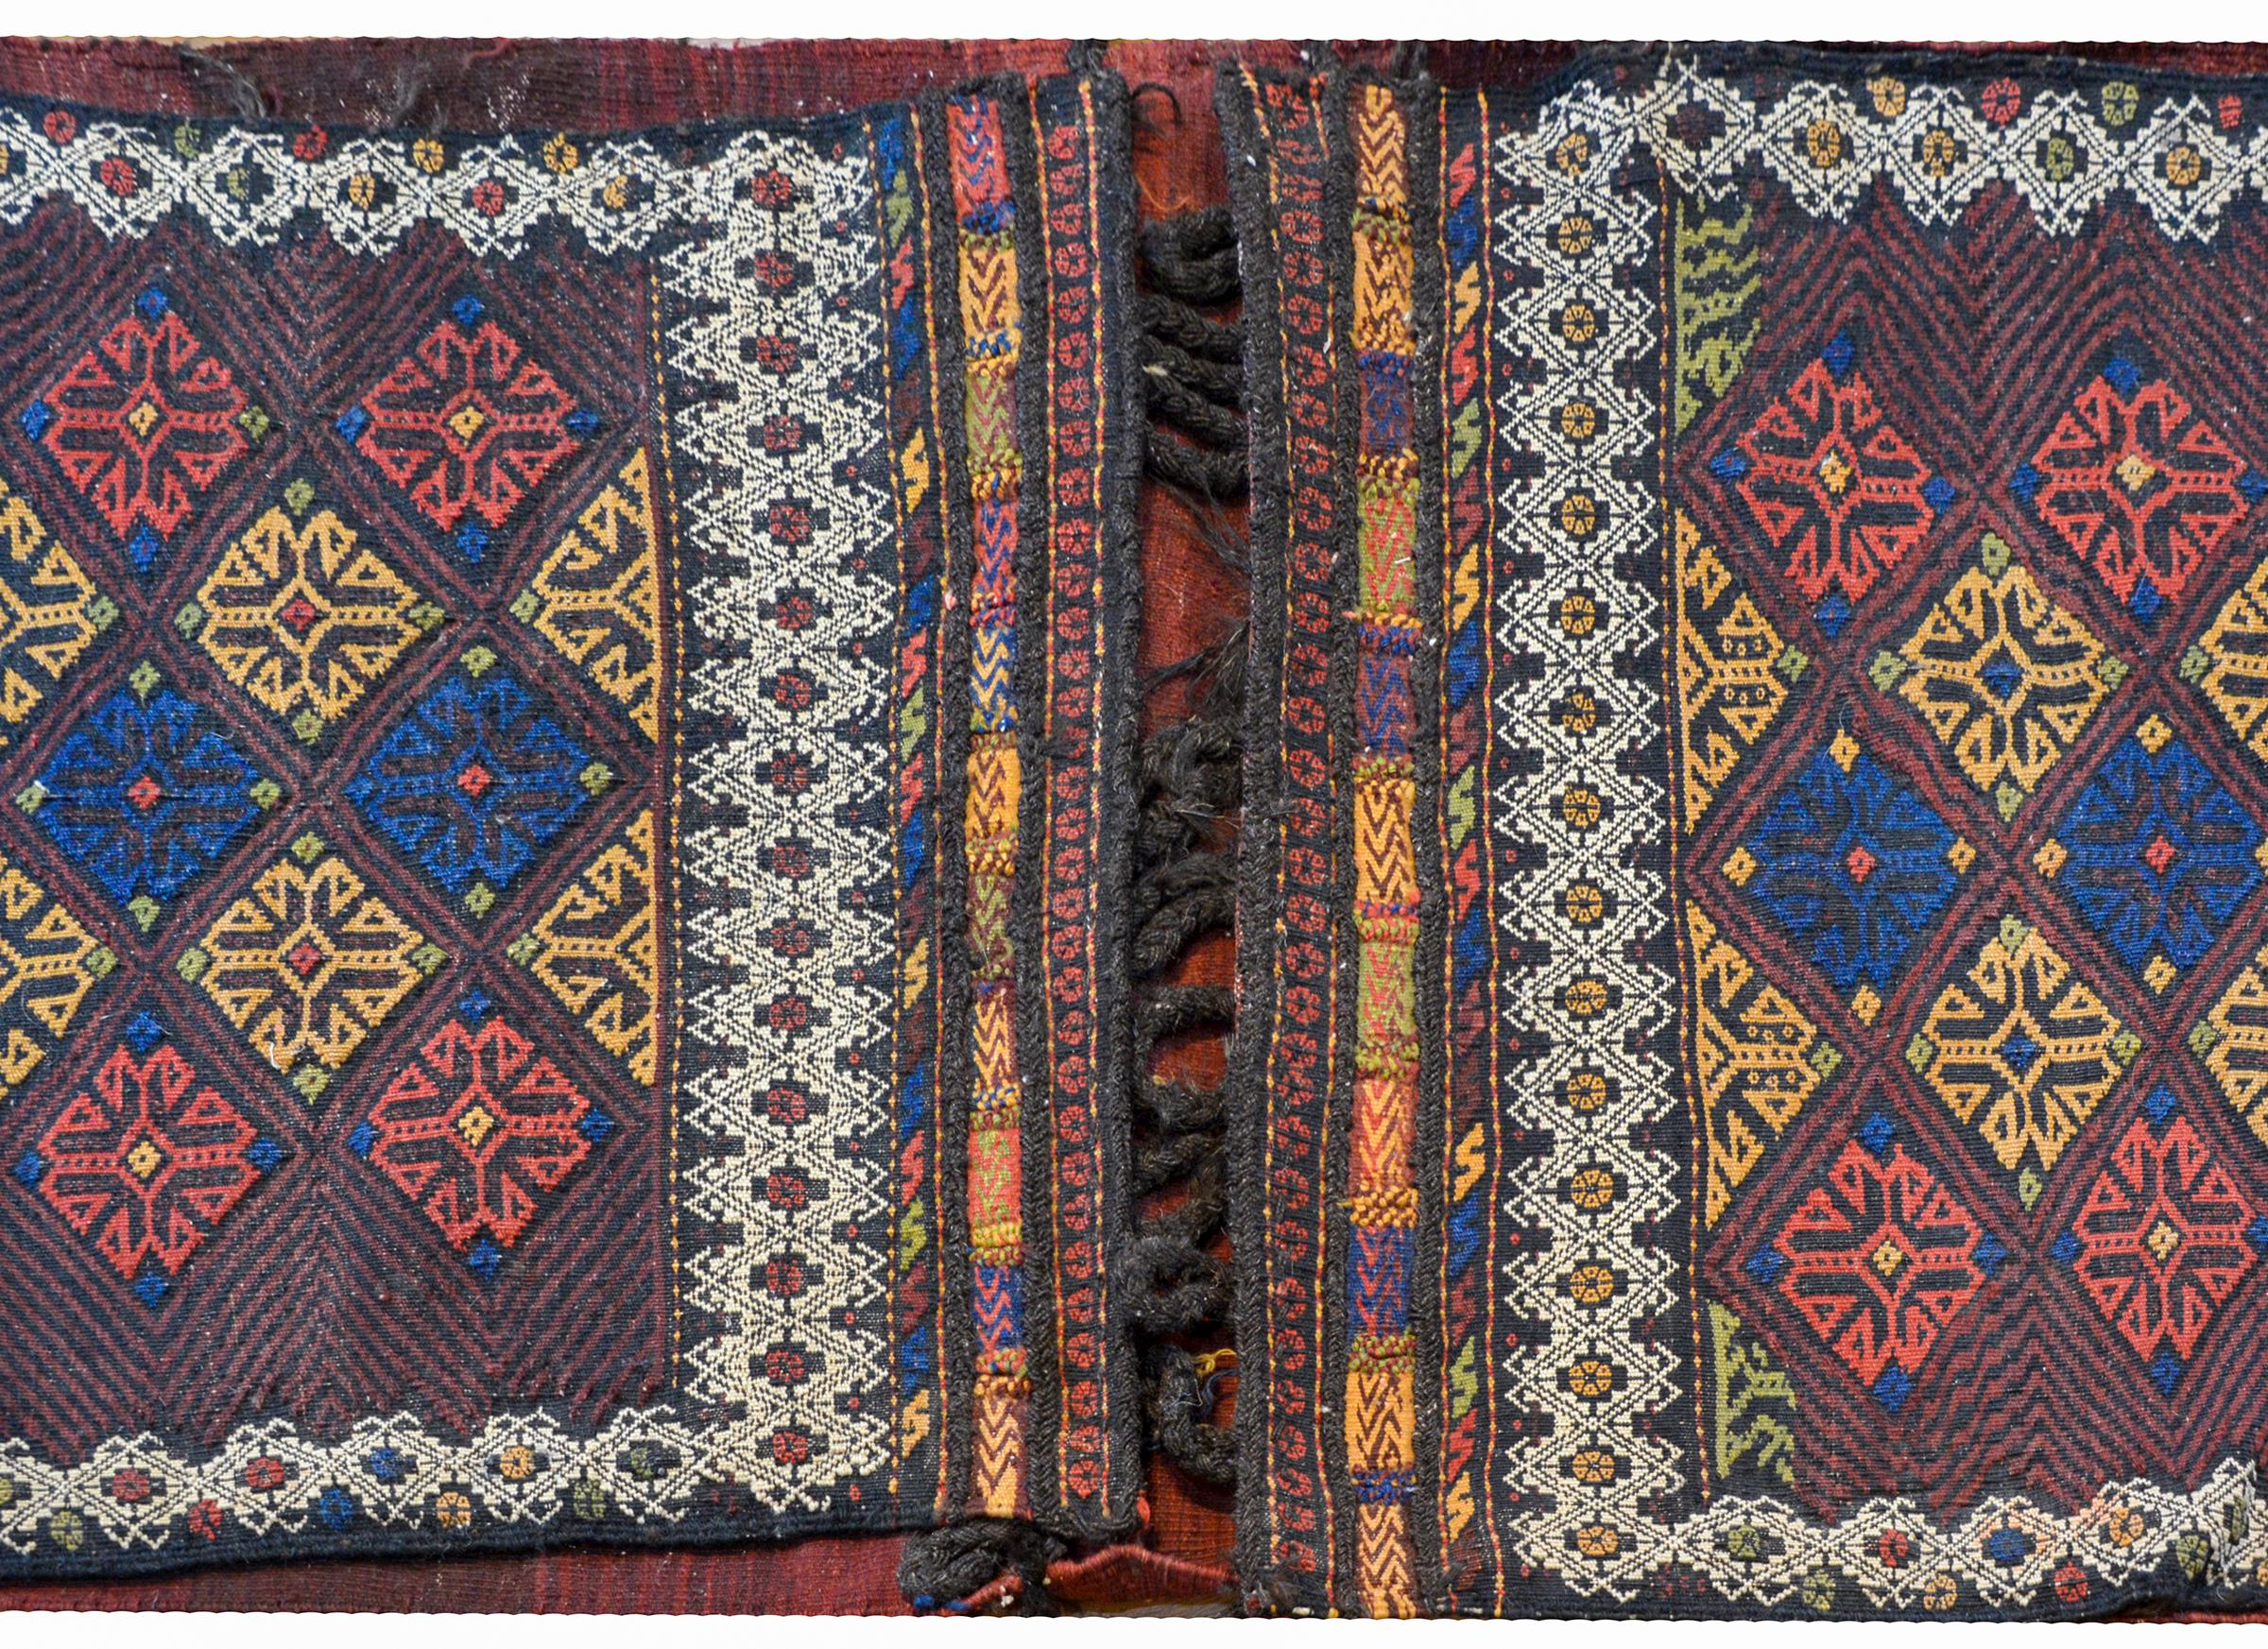 A wondeful early 20th century Persian Shahsevan flat-weave saddlebag with a fantastic multicolored diamond pattern surrounded by a wide white geometric pattern. The back side is woven in varying shades of crimson and indigo.